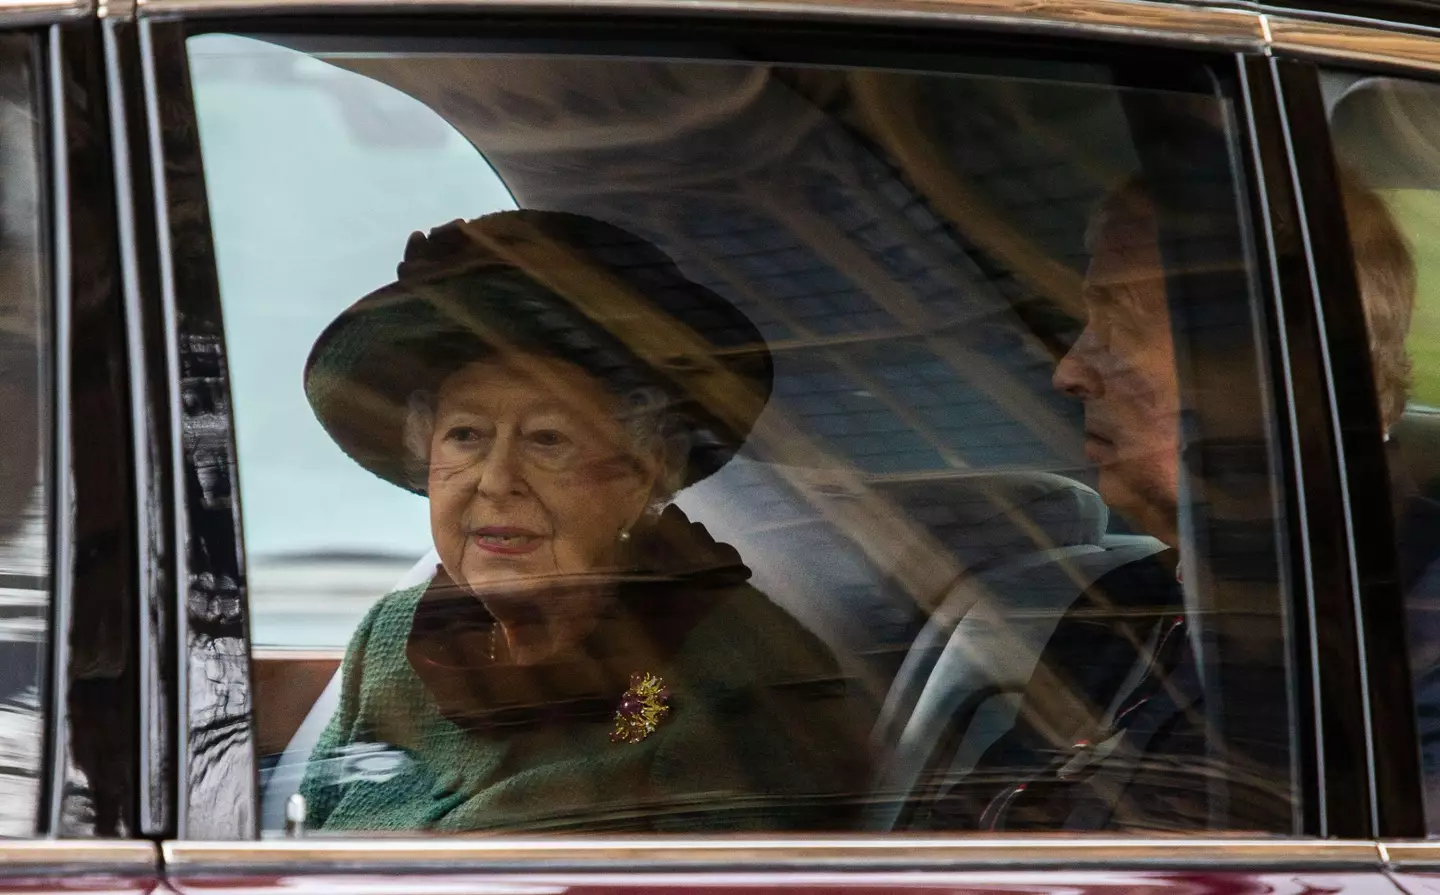 The Queen had stepped back from royal duties recently.